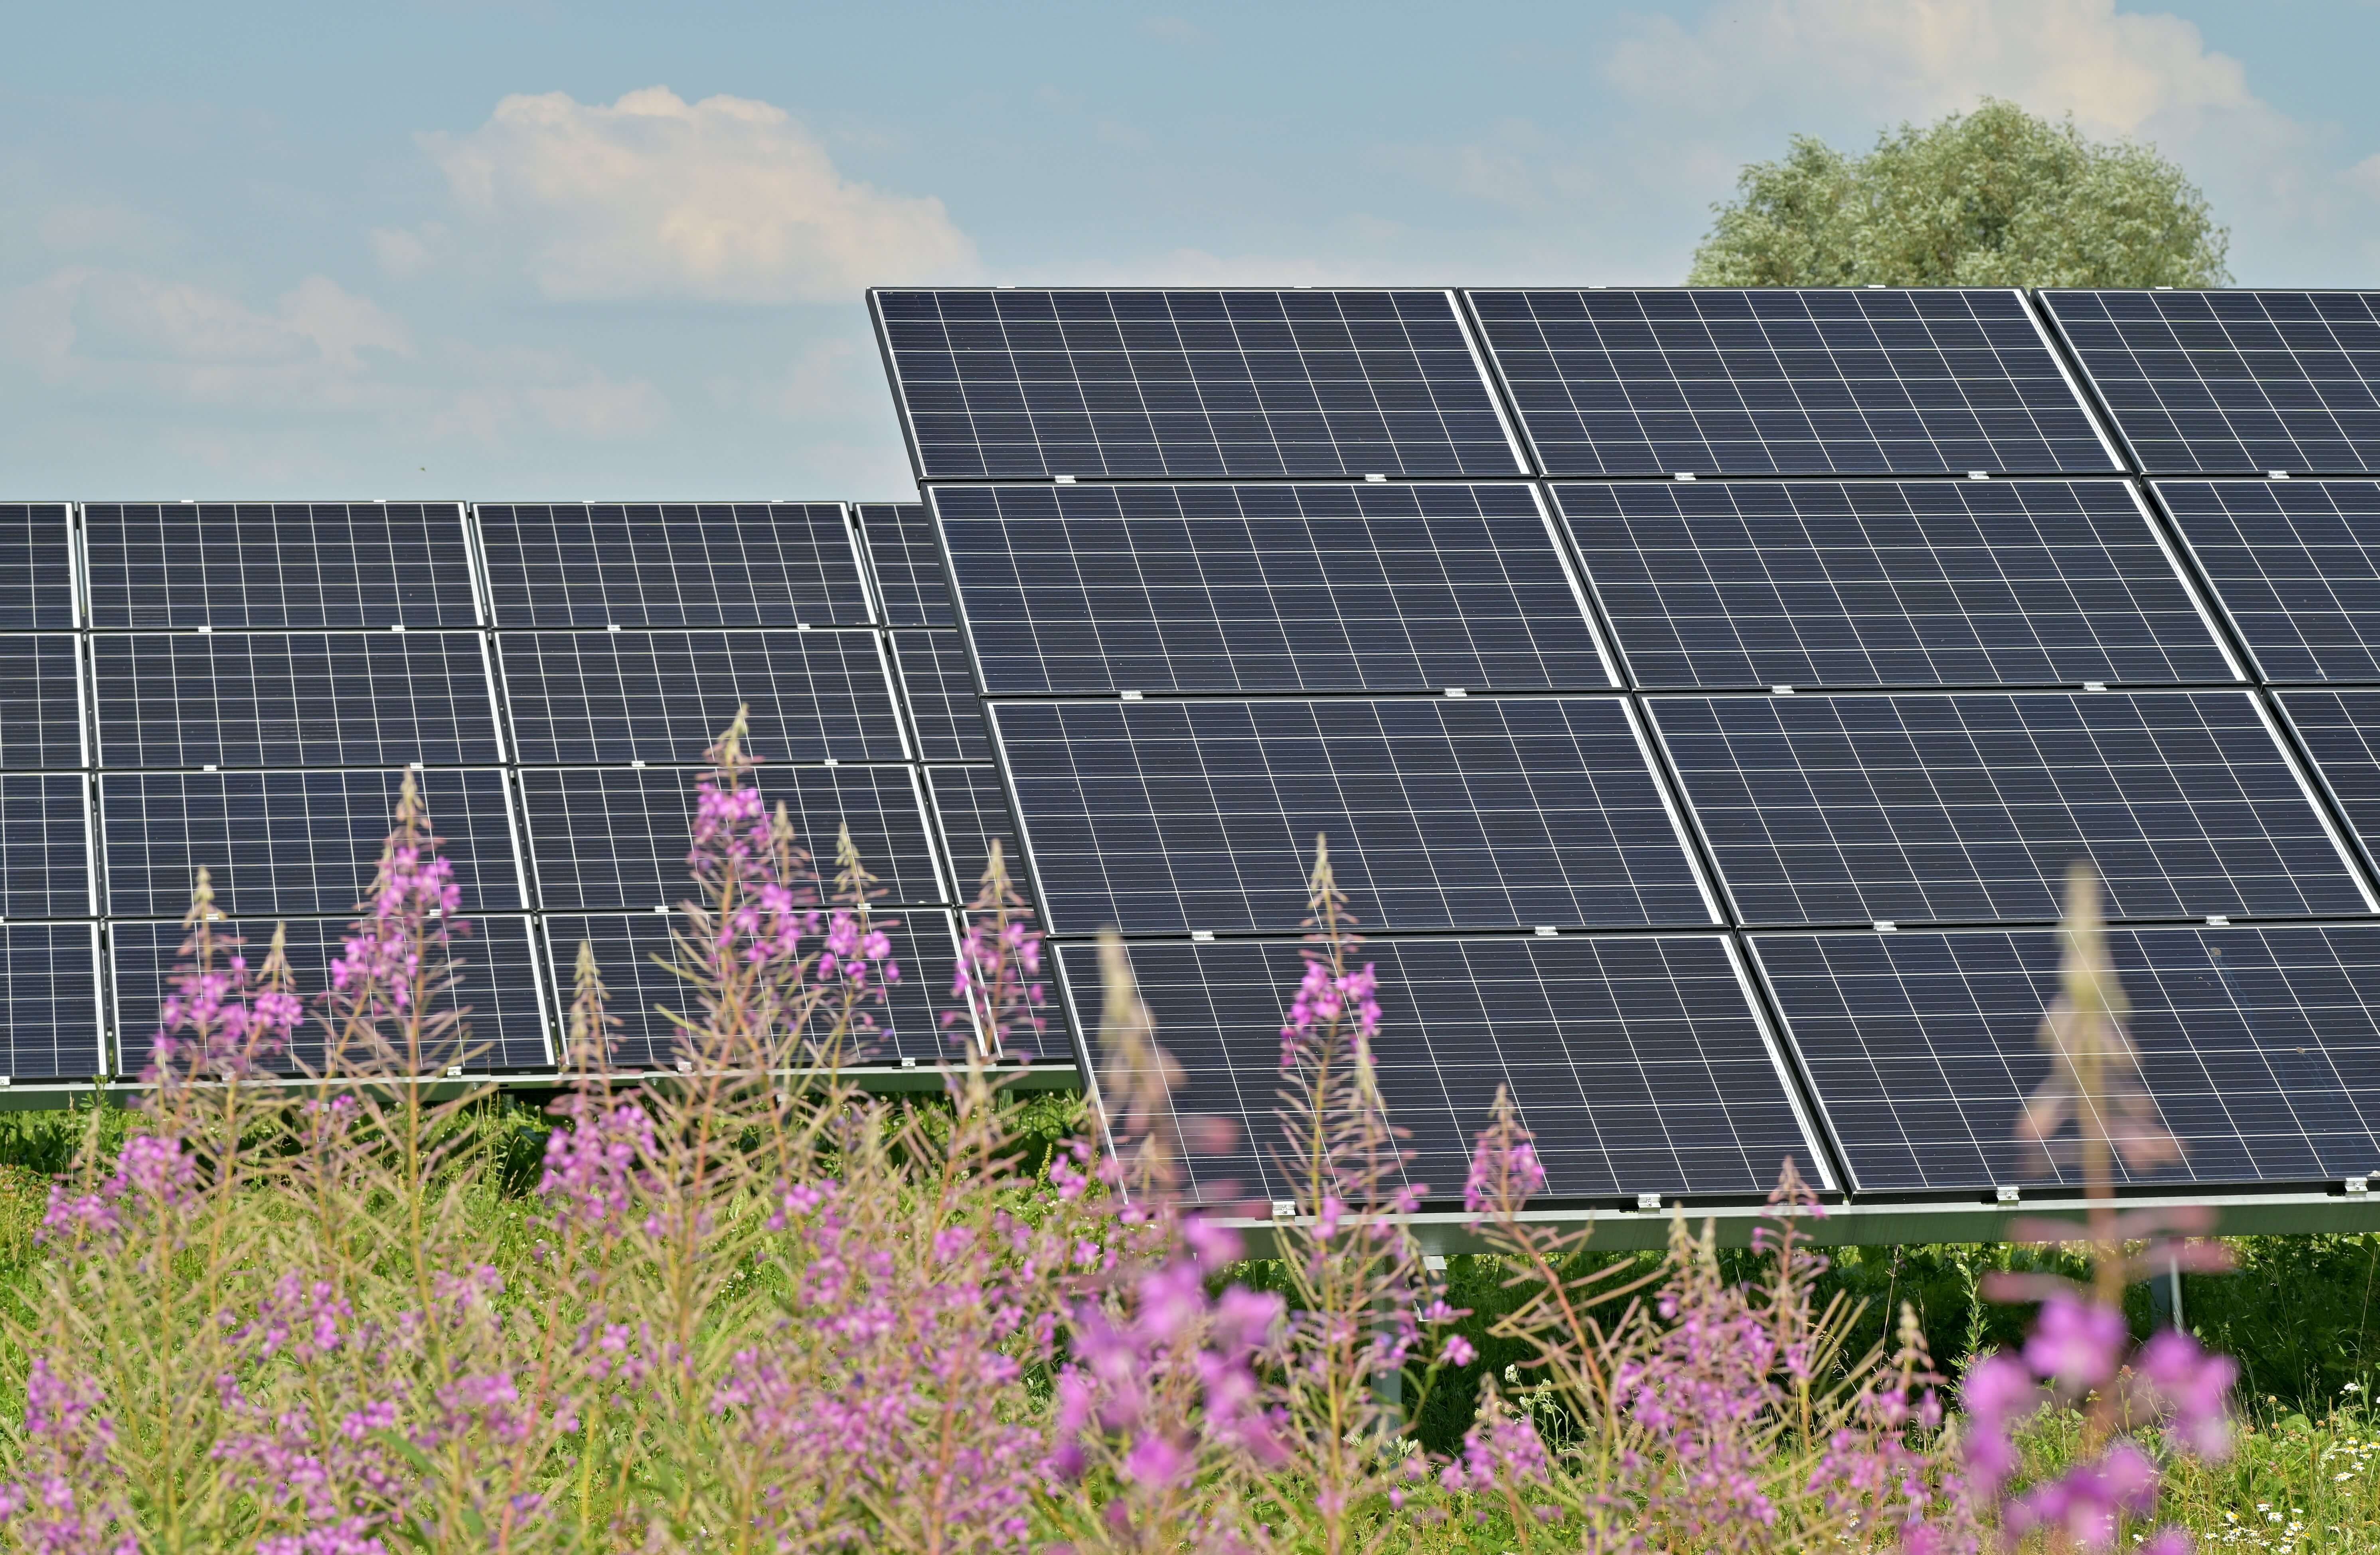 solar panels in a field with flowers